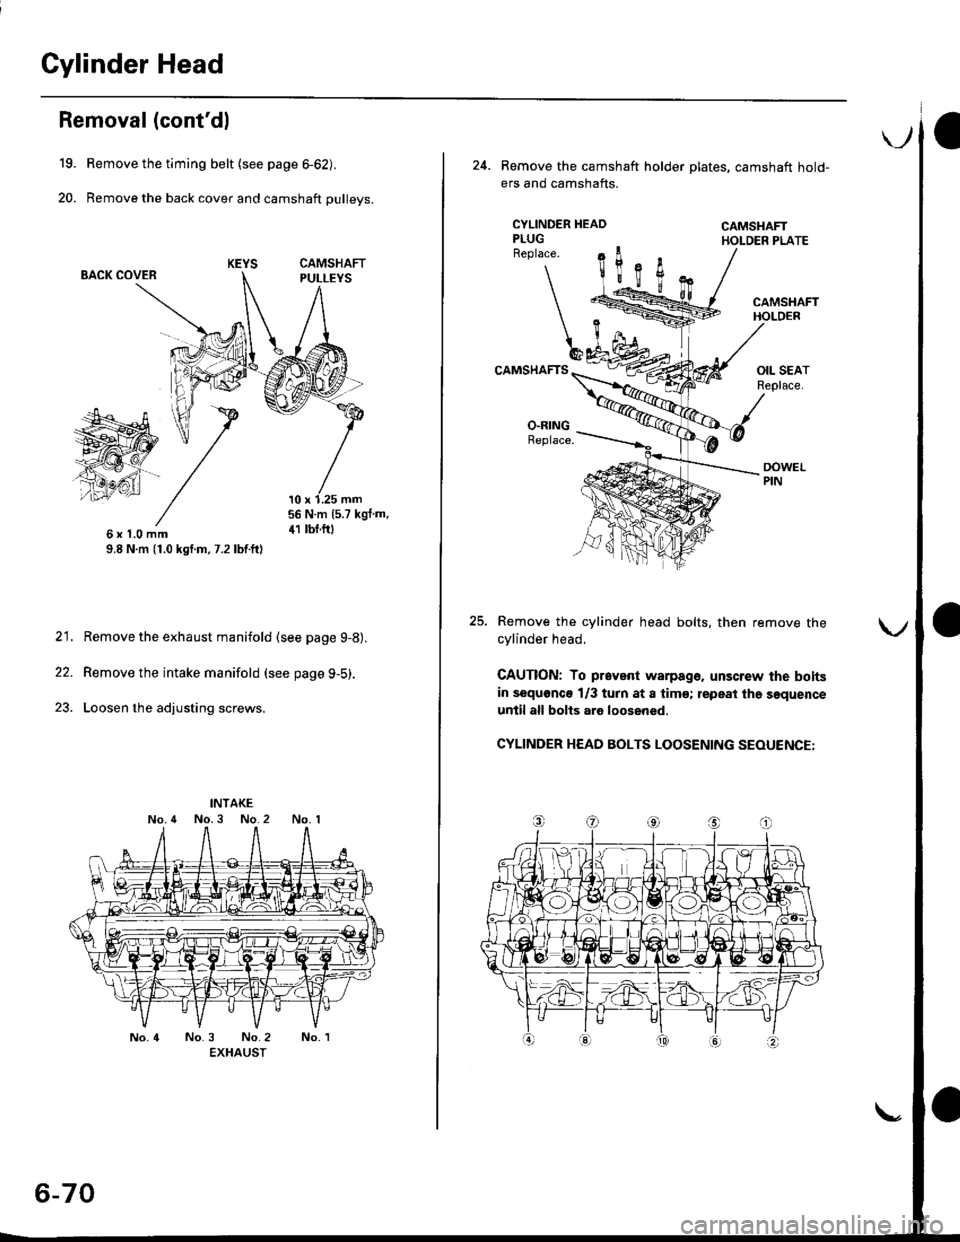 HONDA CIVIC 1998 6.G Owners Manual Cylinder Head
19.
20.
Removal (contdl
Remove the timing belt {see page 6-62).
Remove the back cover and camshaft pulleys.
BACK COVER
56 N.m (5.7 kgf m,
41 tbt.f06xl.0mm9.8 N,m (1.0 kgf.m, 7.2 lbf.ft)